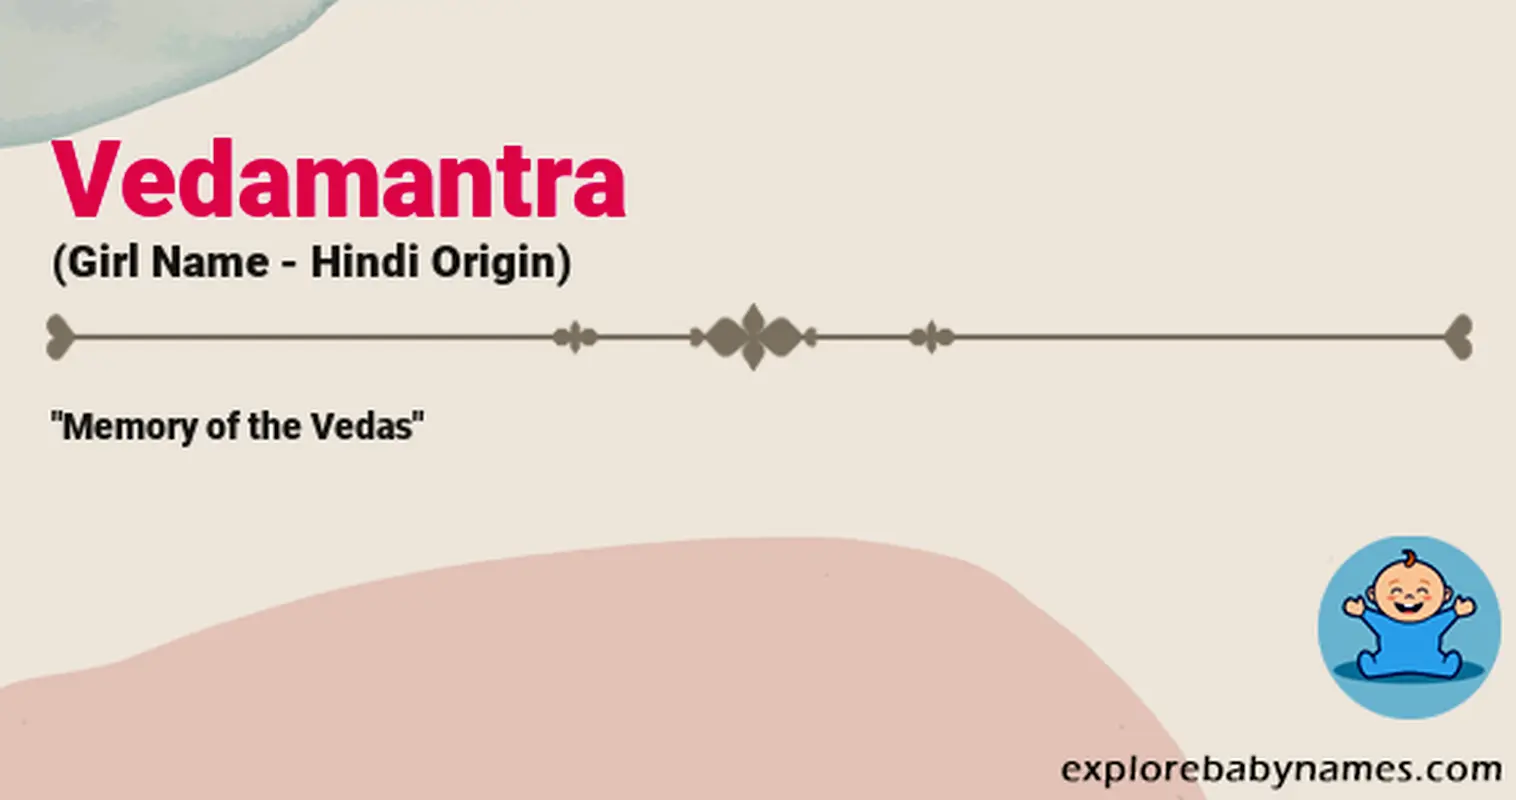 Meaning of Vedamantra